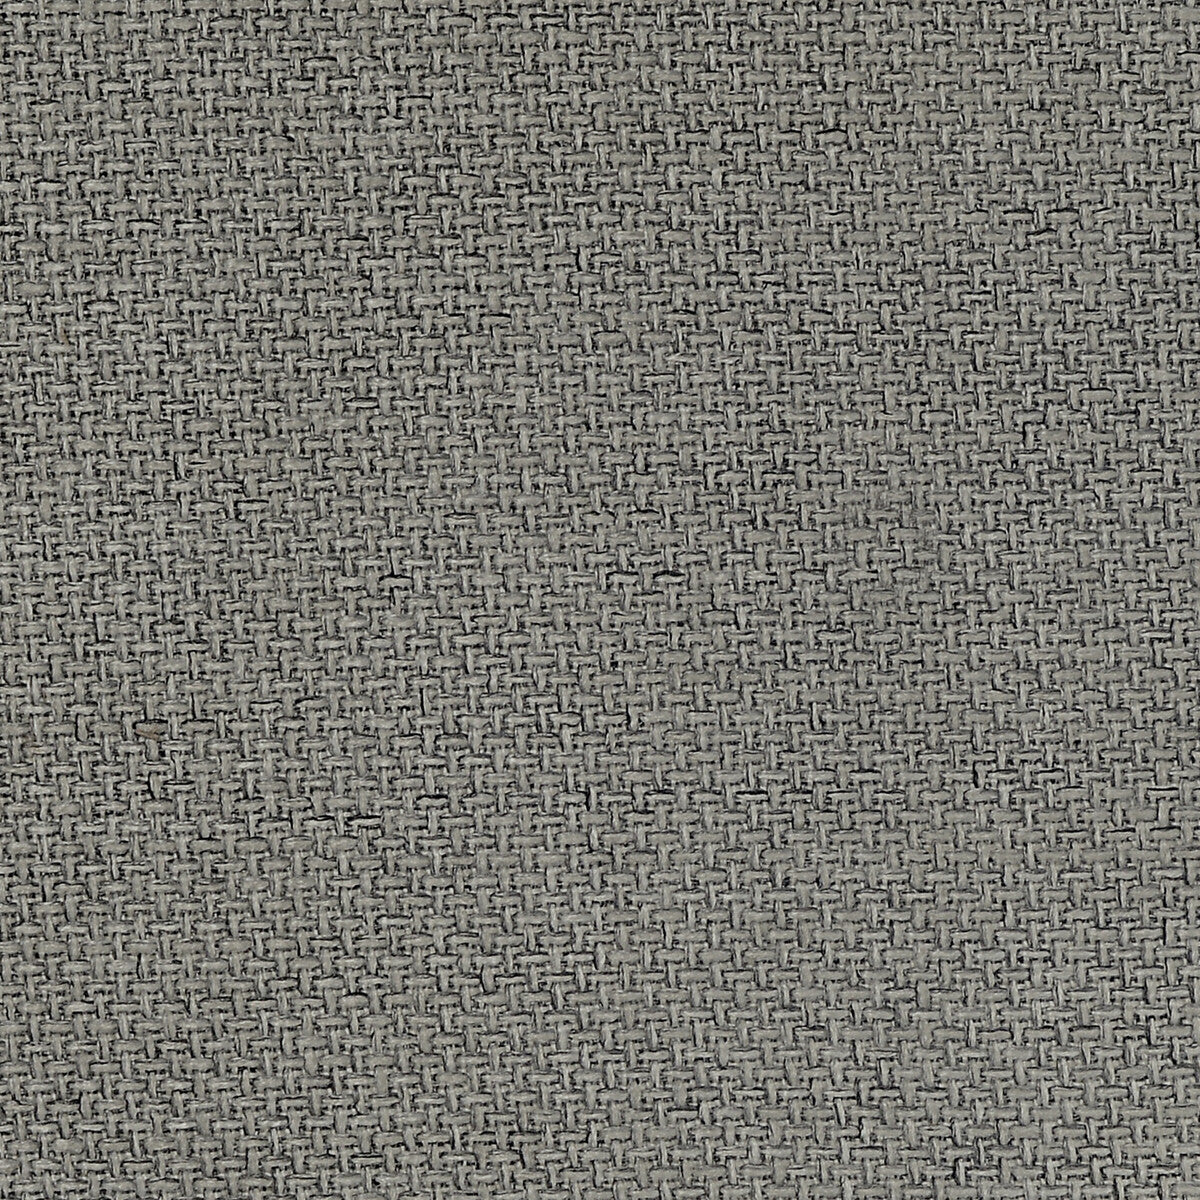 Kravet Contract fabric in 35182-11 color - pattern 35182.11.0 - by Kravet Contract